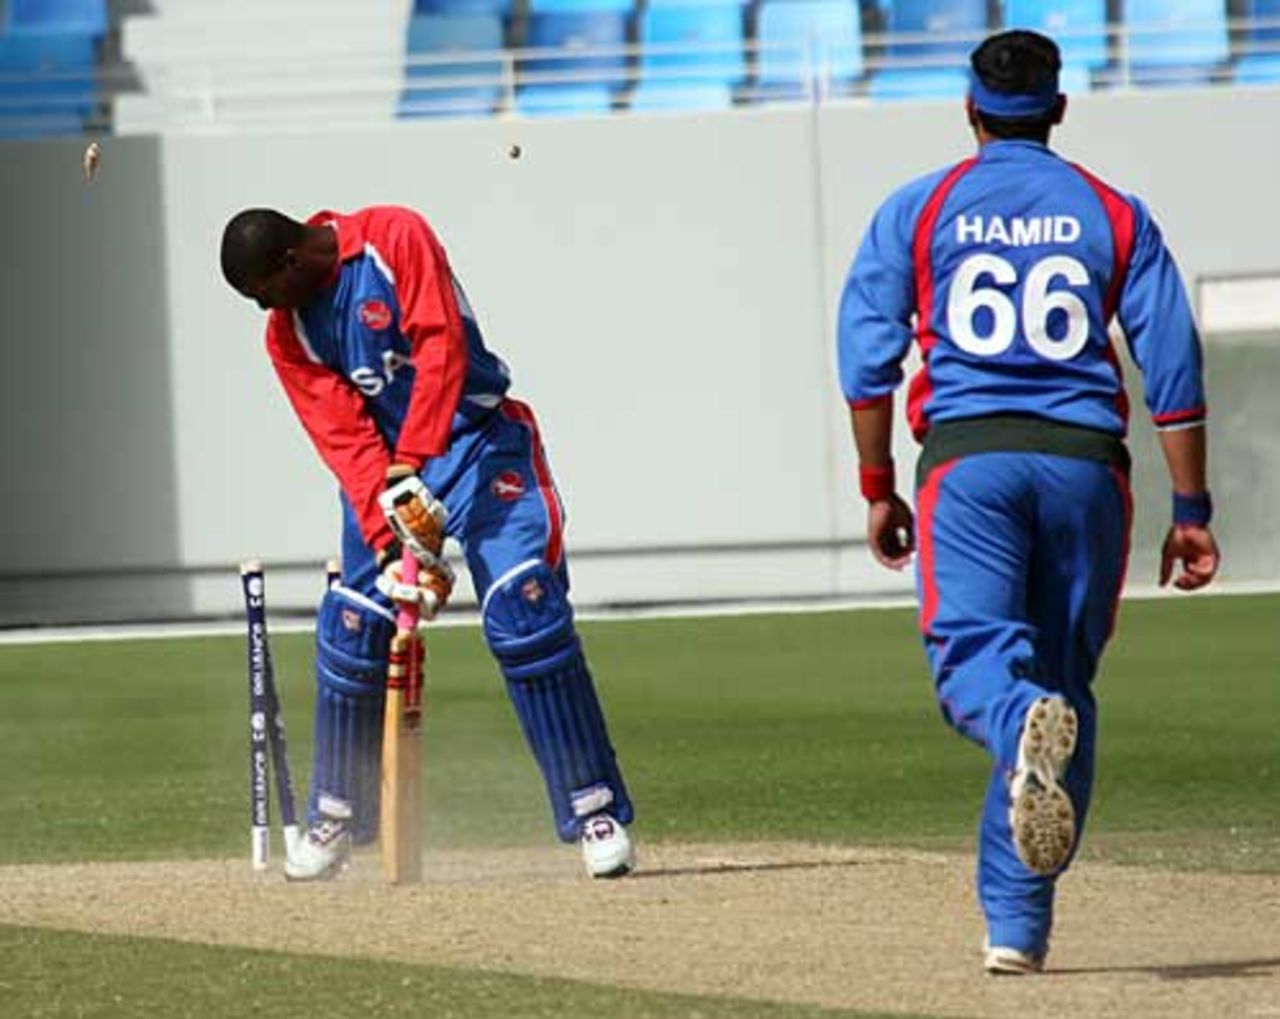 Timroy Allen is yorked by Hamid Hassan, Afghanistan v USA, ICC World Twenty20 Qualifiers, Dubai, February 11, 2010